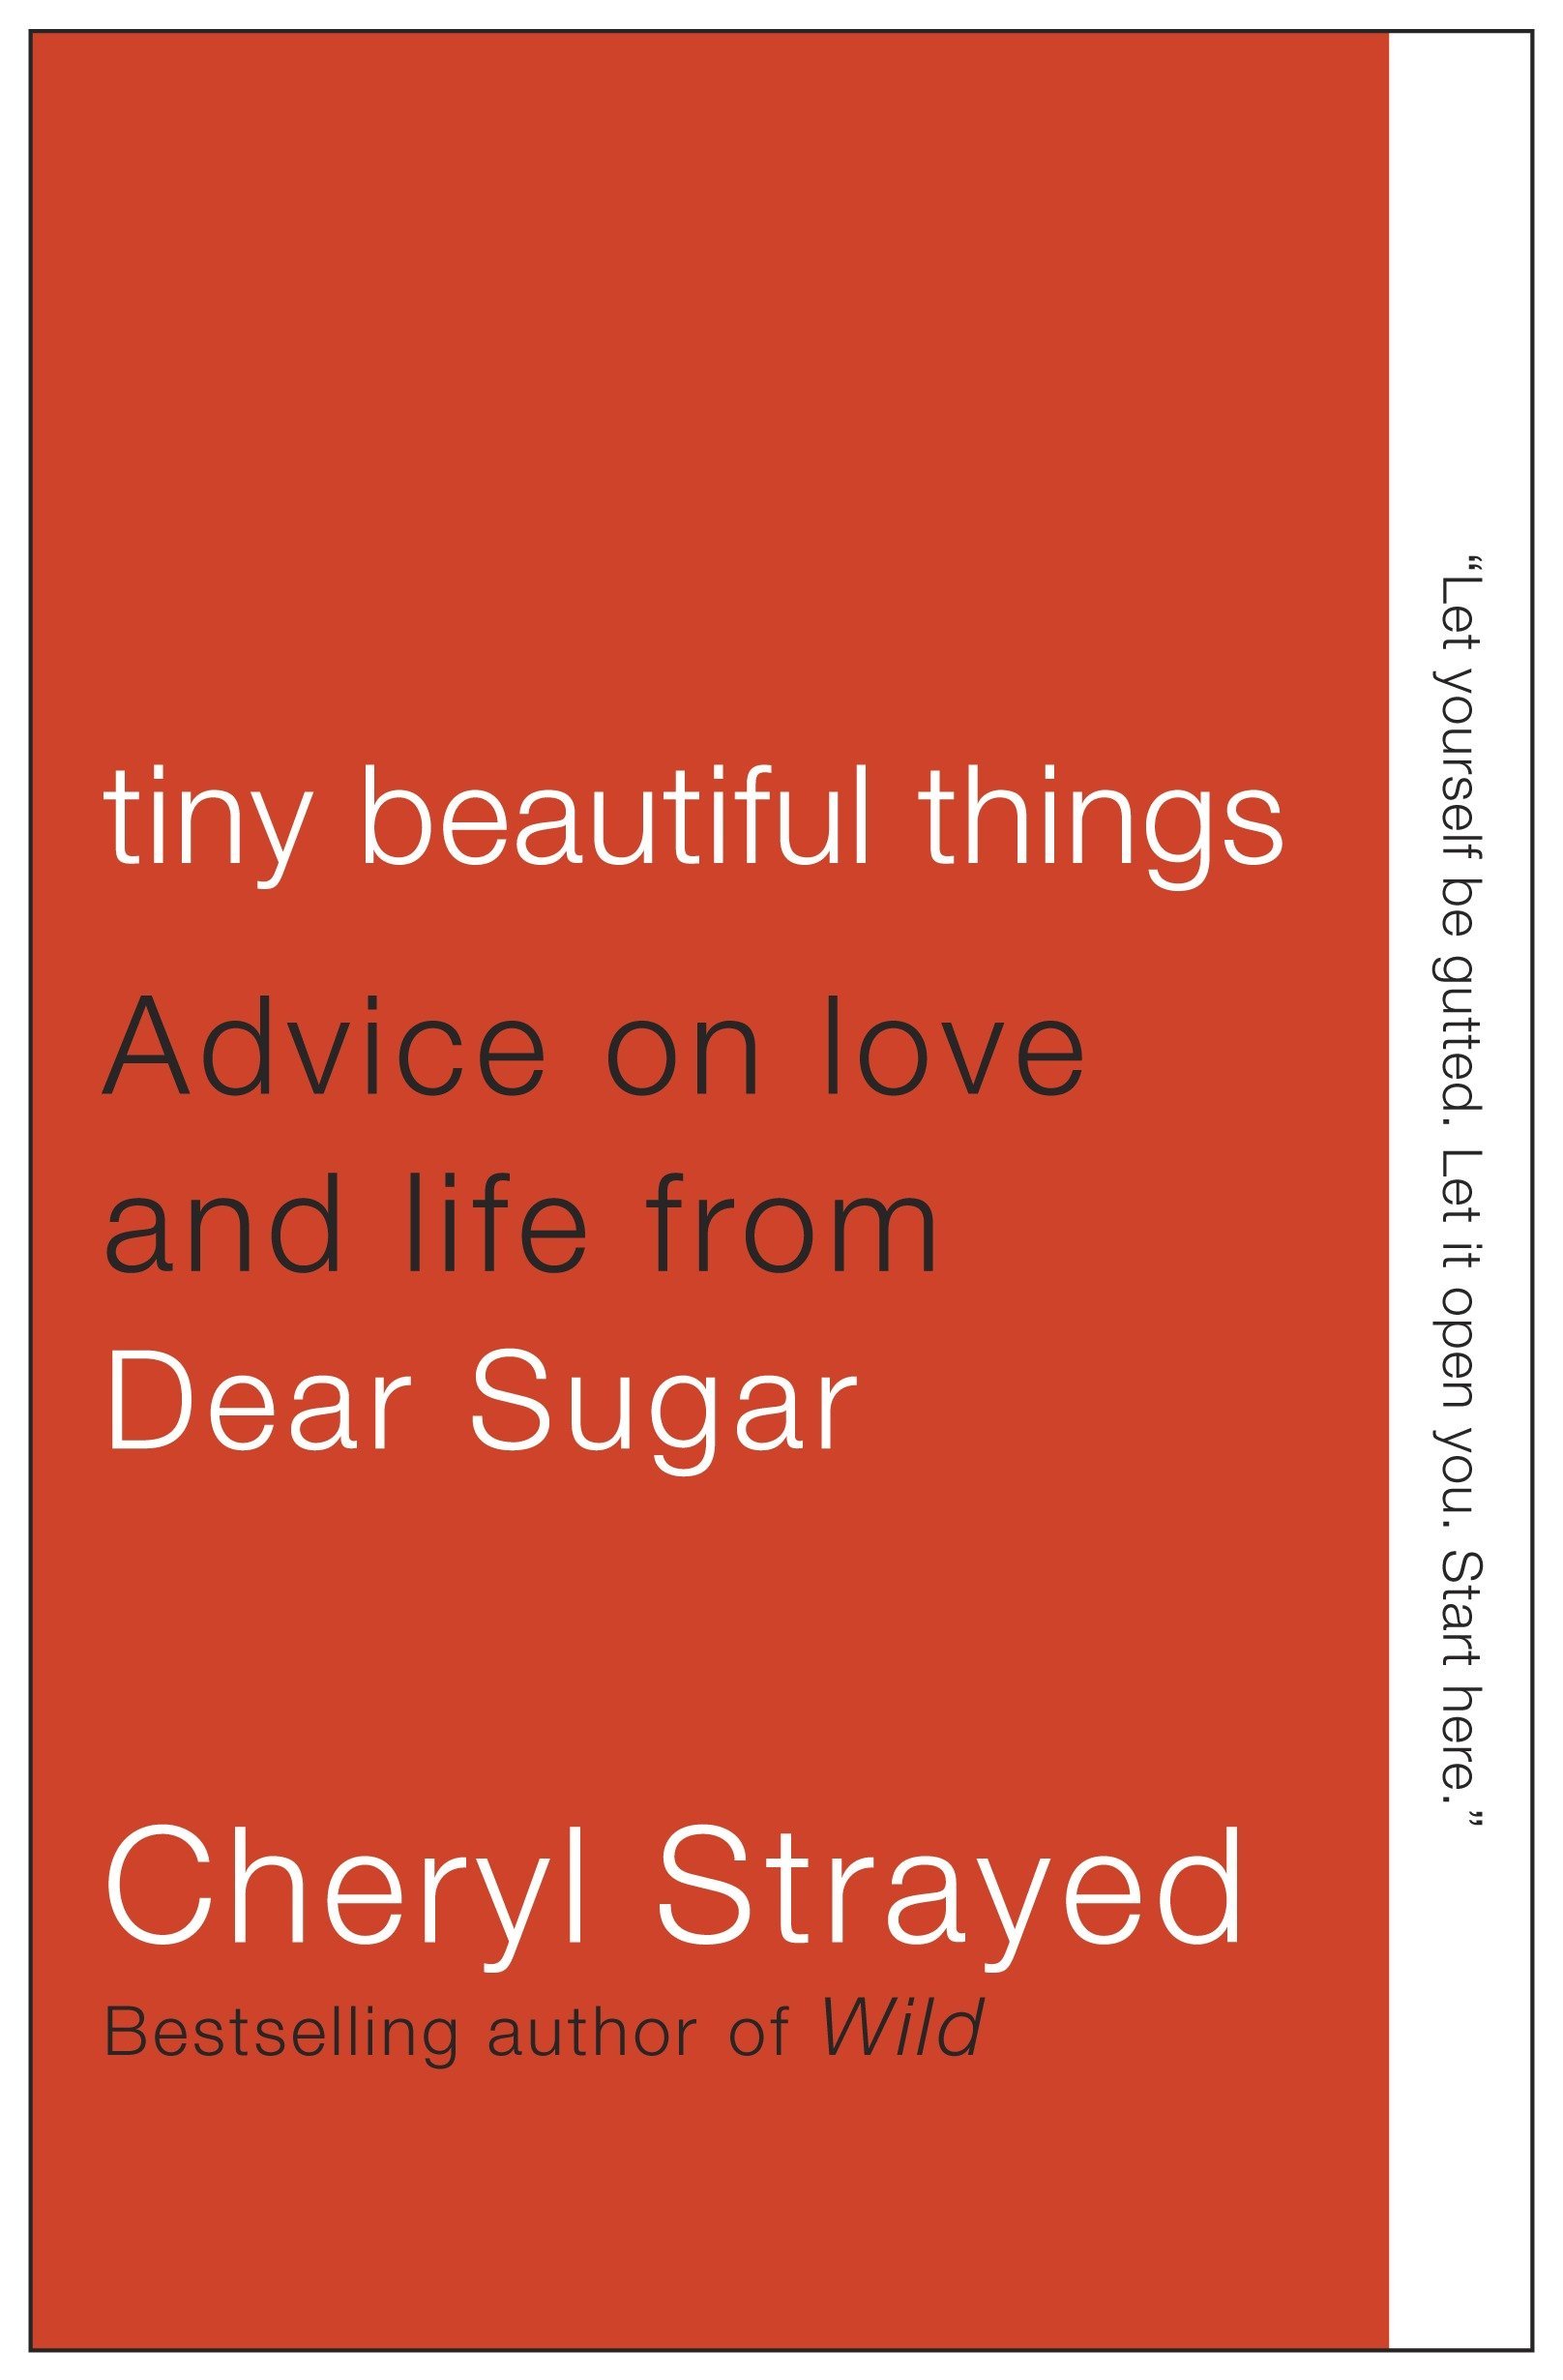 'Tiny Beautiful Things: Advice on Love and Life from Dear Sugar' by Cheryl Strayed